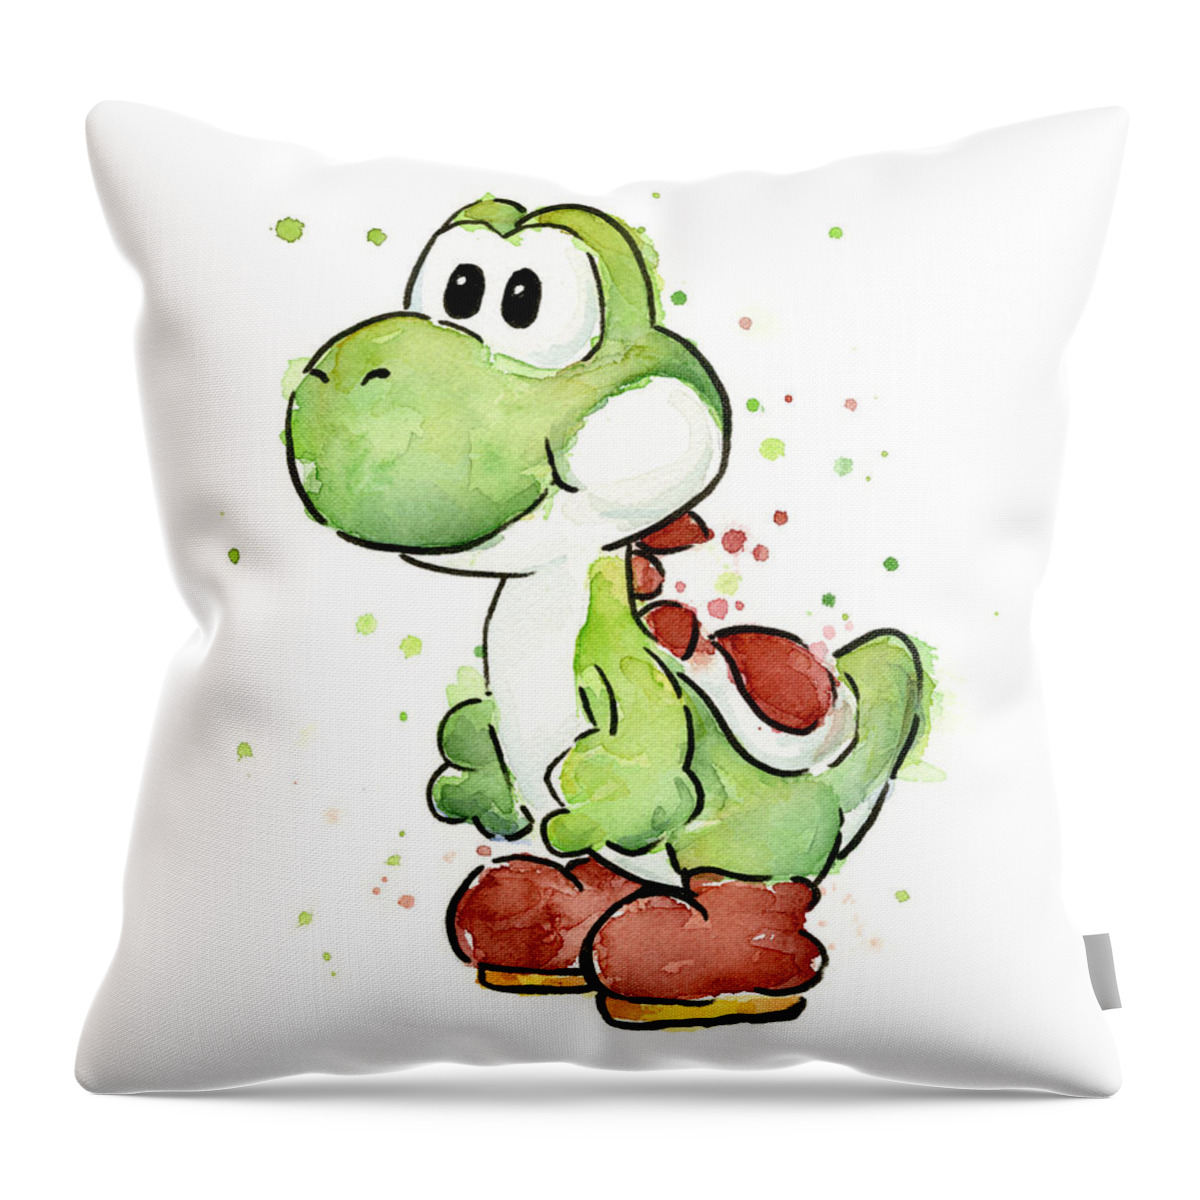 Watercolor Throw Pillow featuring the painting Yoshi Watercolor by Olga Shvartsur